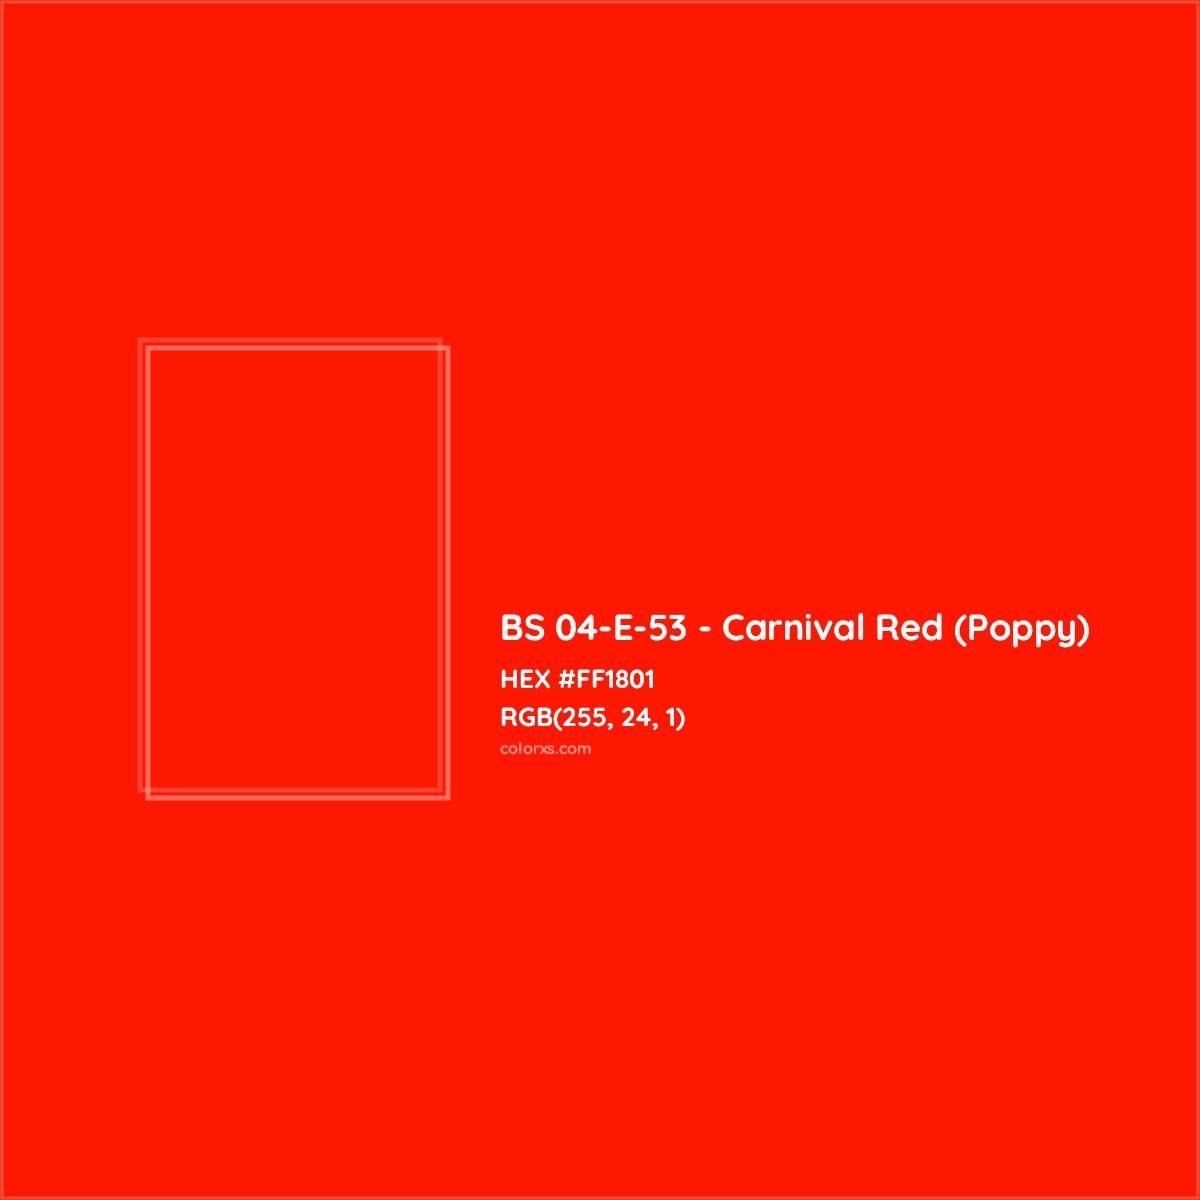 HEX #FF1801 BS 04-E-53 - Carnival Red (Poppy) CMS British Standard 4800 - Color Code